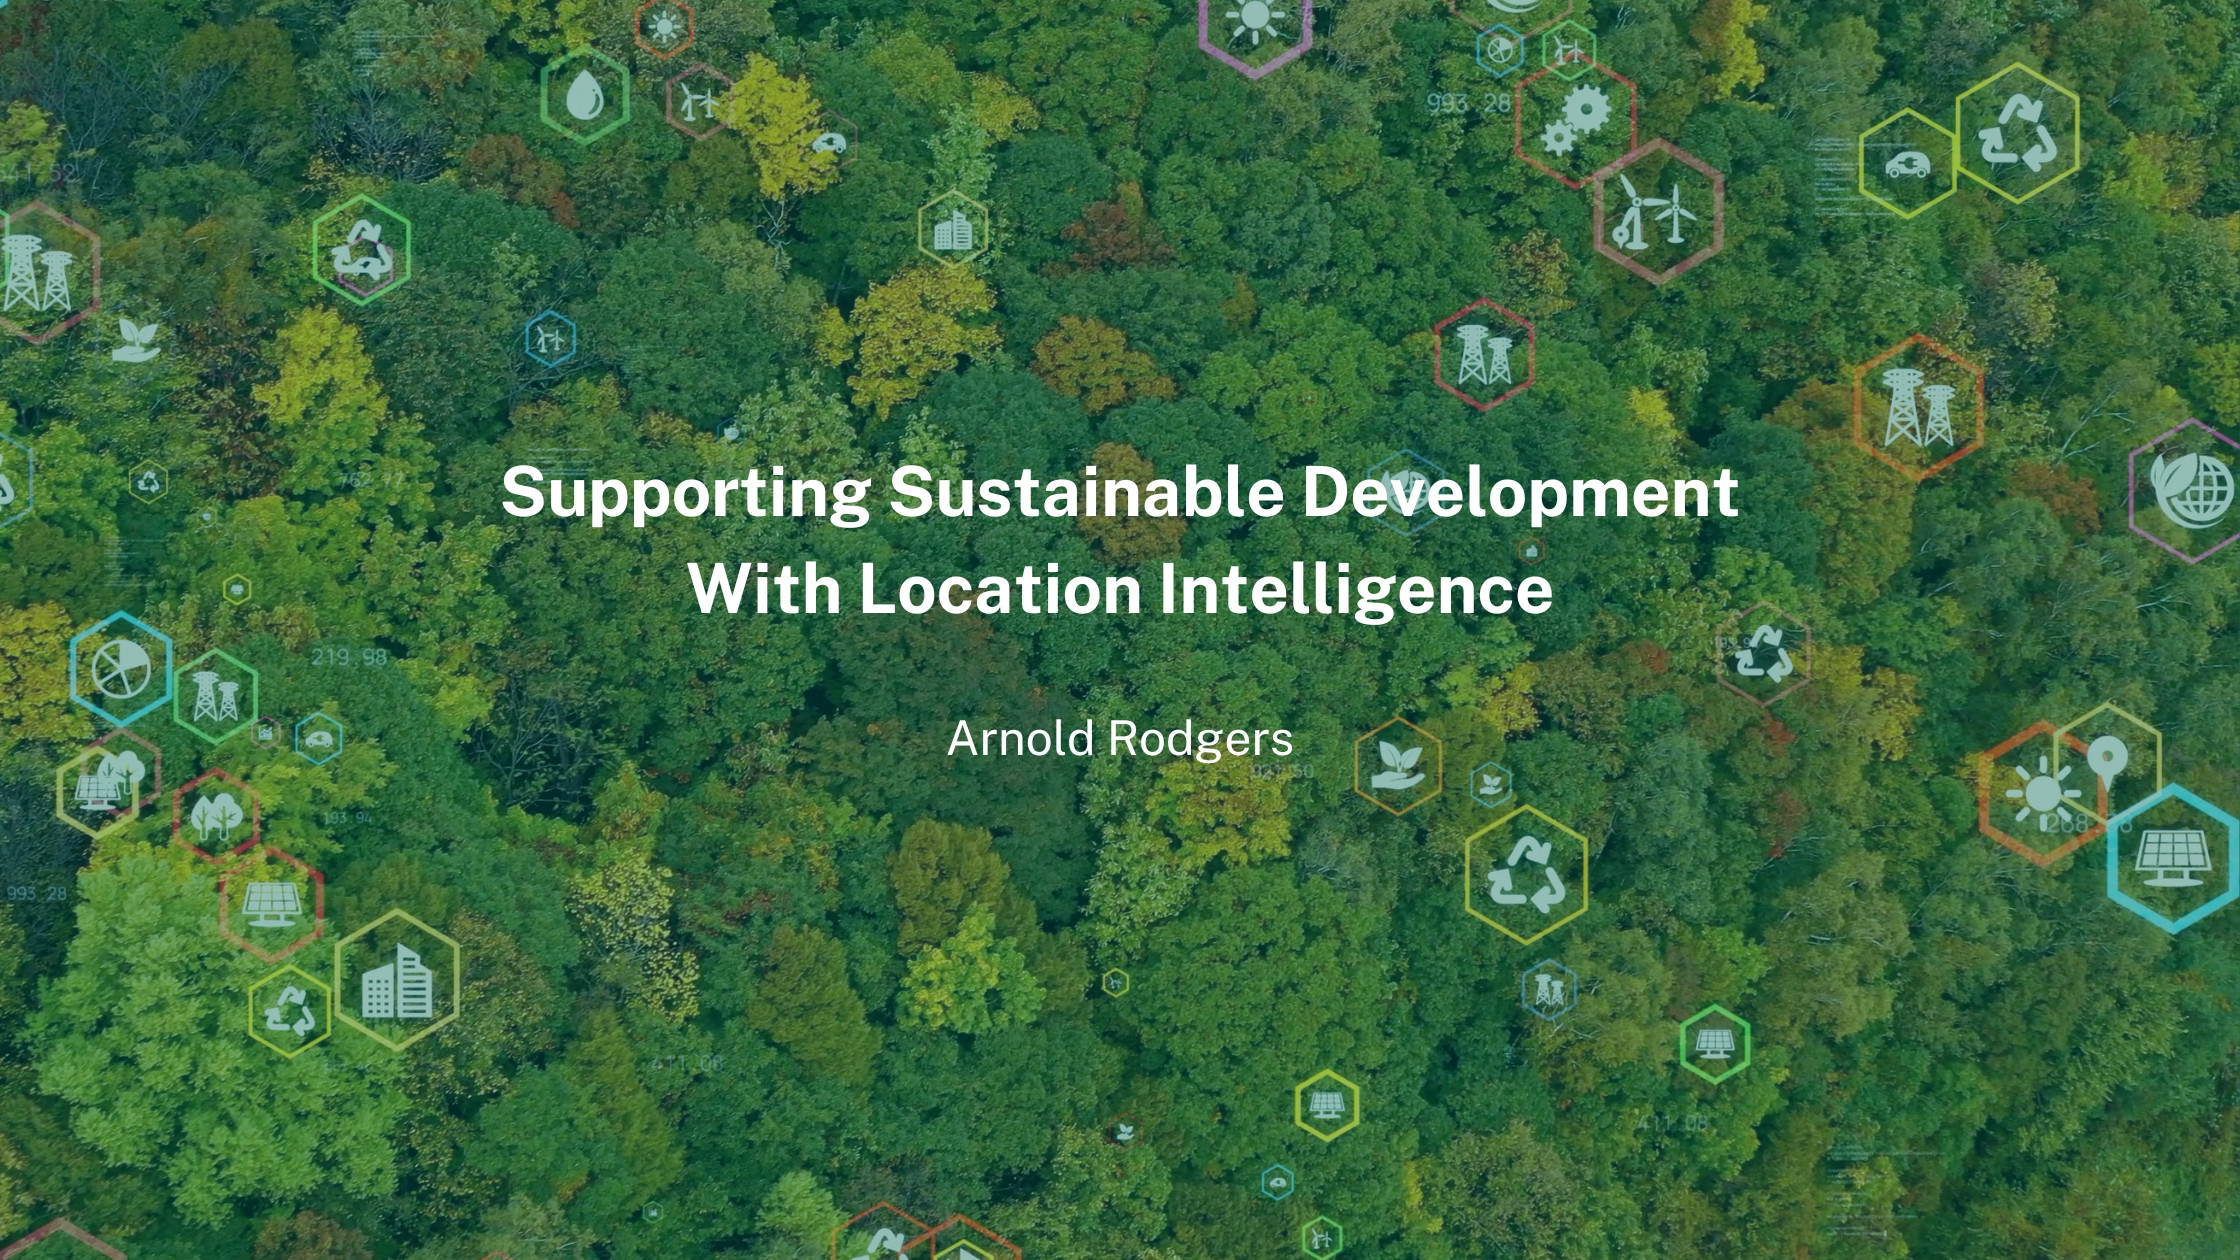 Supporting Sustainable Development with Location Intelligence by Arnold Rodgers